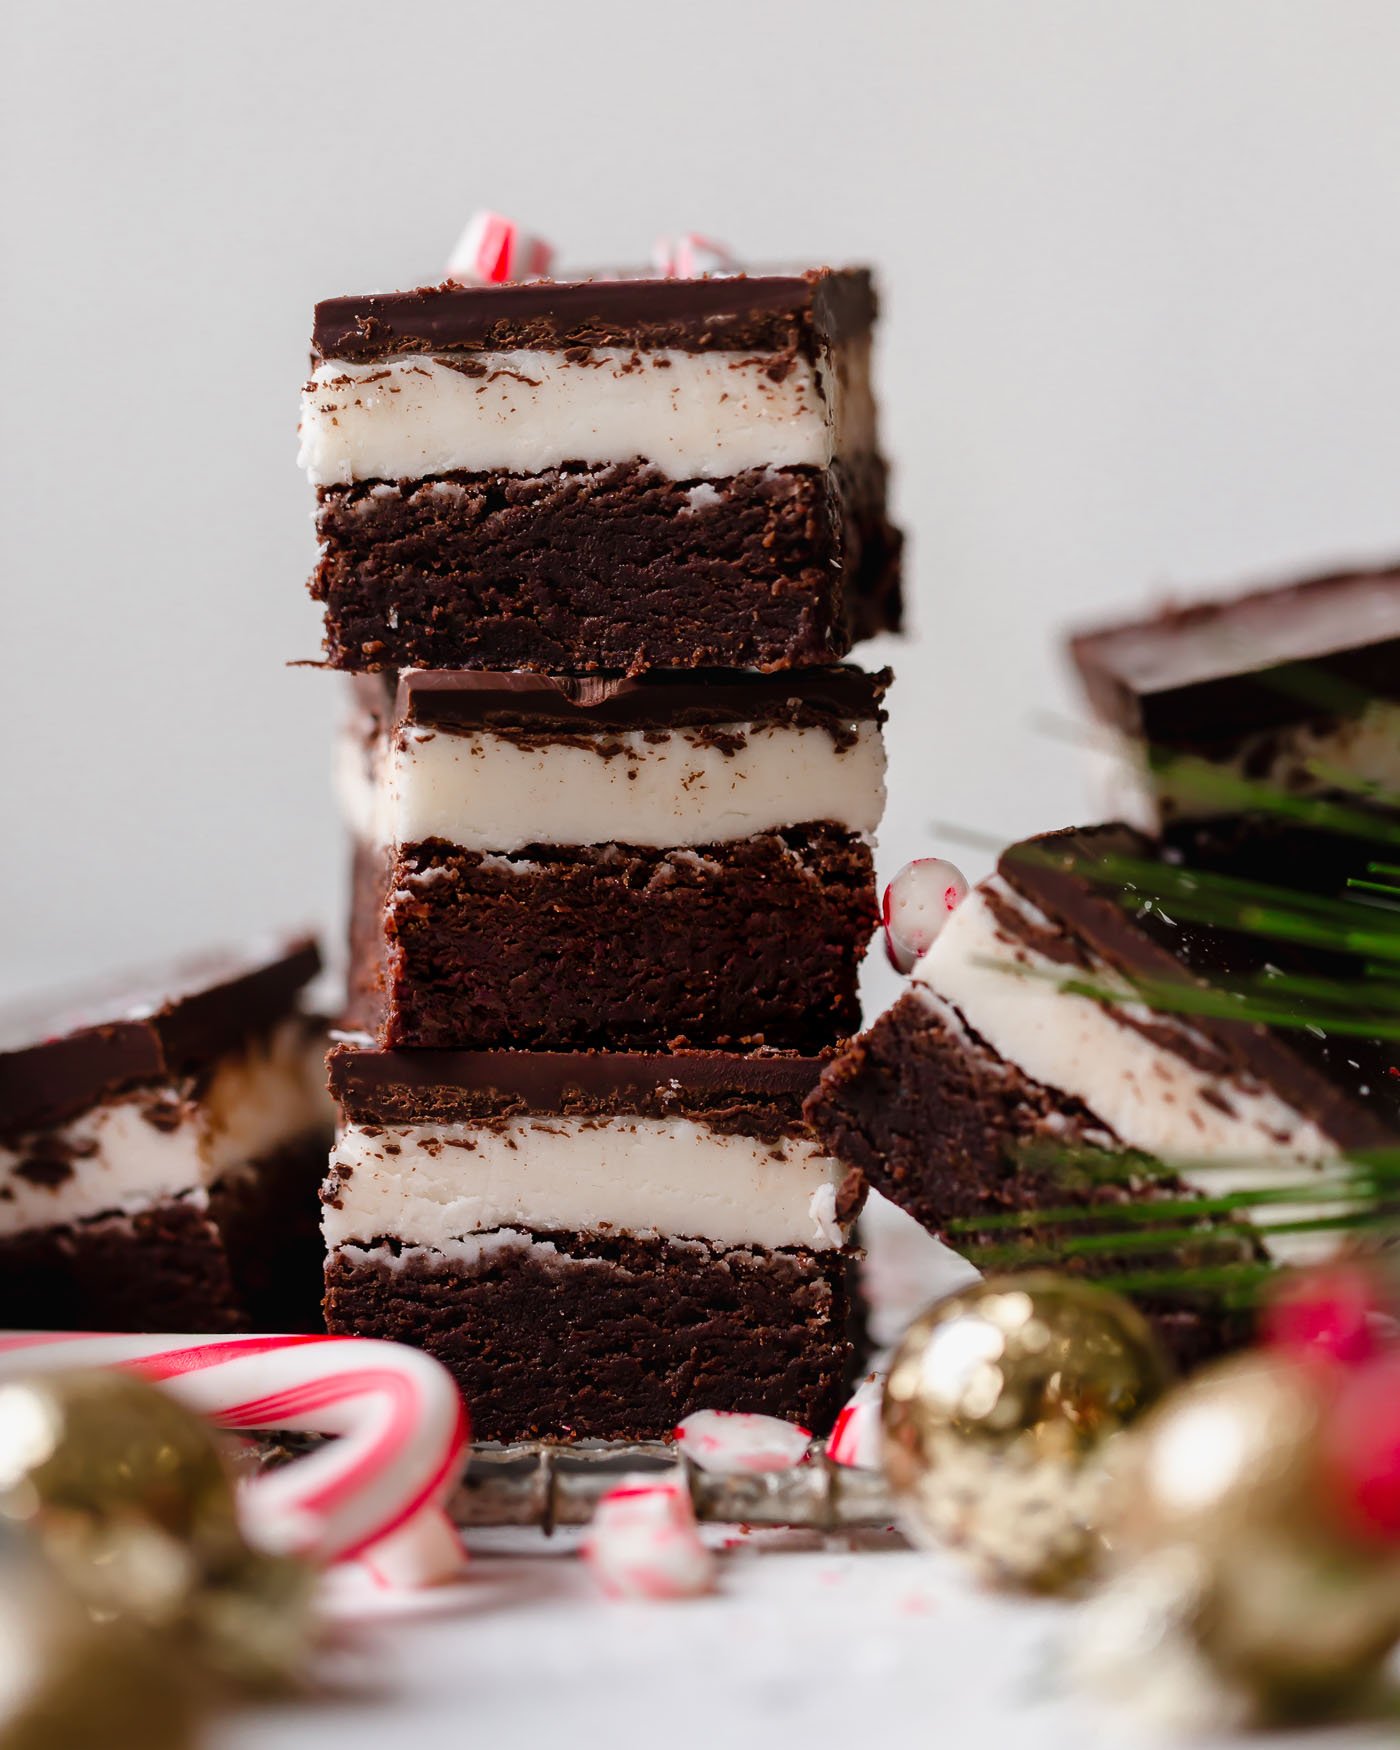 dark chocolate peppermint brownies recipe. extra fudgy dark chocolate brownies topped with homemade peppermint frosting & an easy chocolate glaze. the ultimate easy recipe for a festive holiday dessert! #mintbrowniesrecipe #classicmintbrownies #mintbrowniesfromscratch #mintfrosting #bestmintbrownies #christmascookies #christmasdesserts #darkchocolate #browniesfromscratch #brownieseasy #holidaybaking